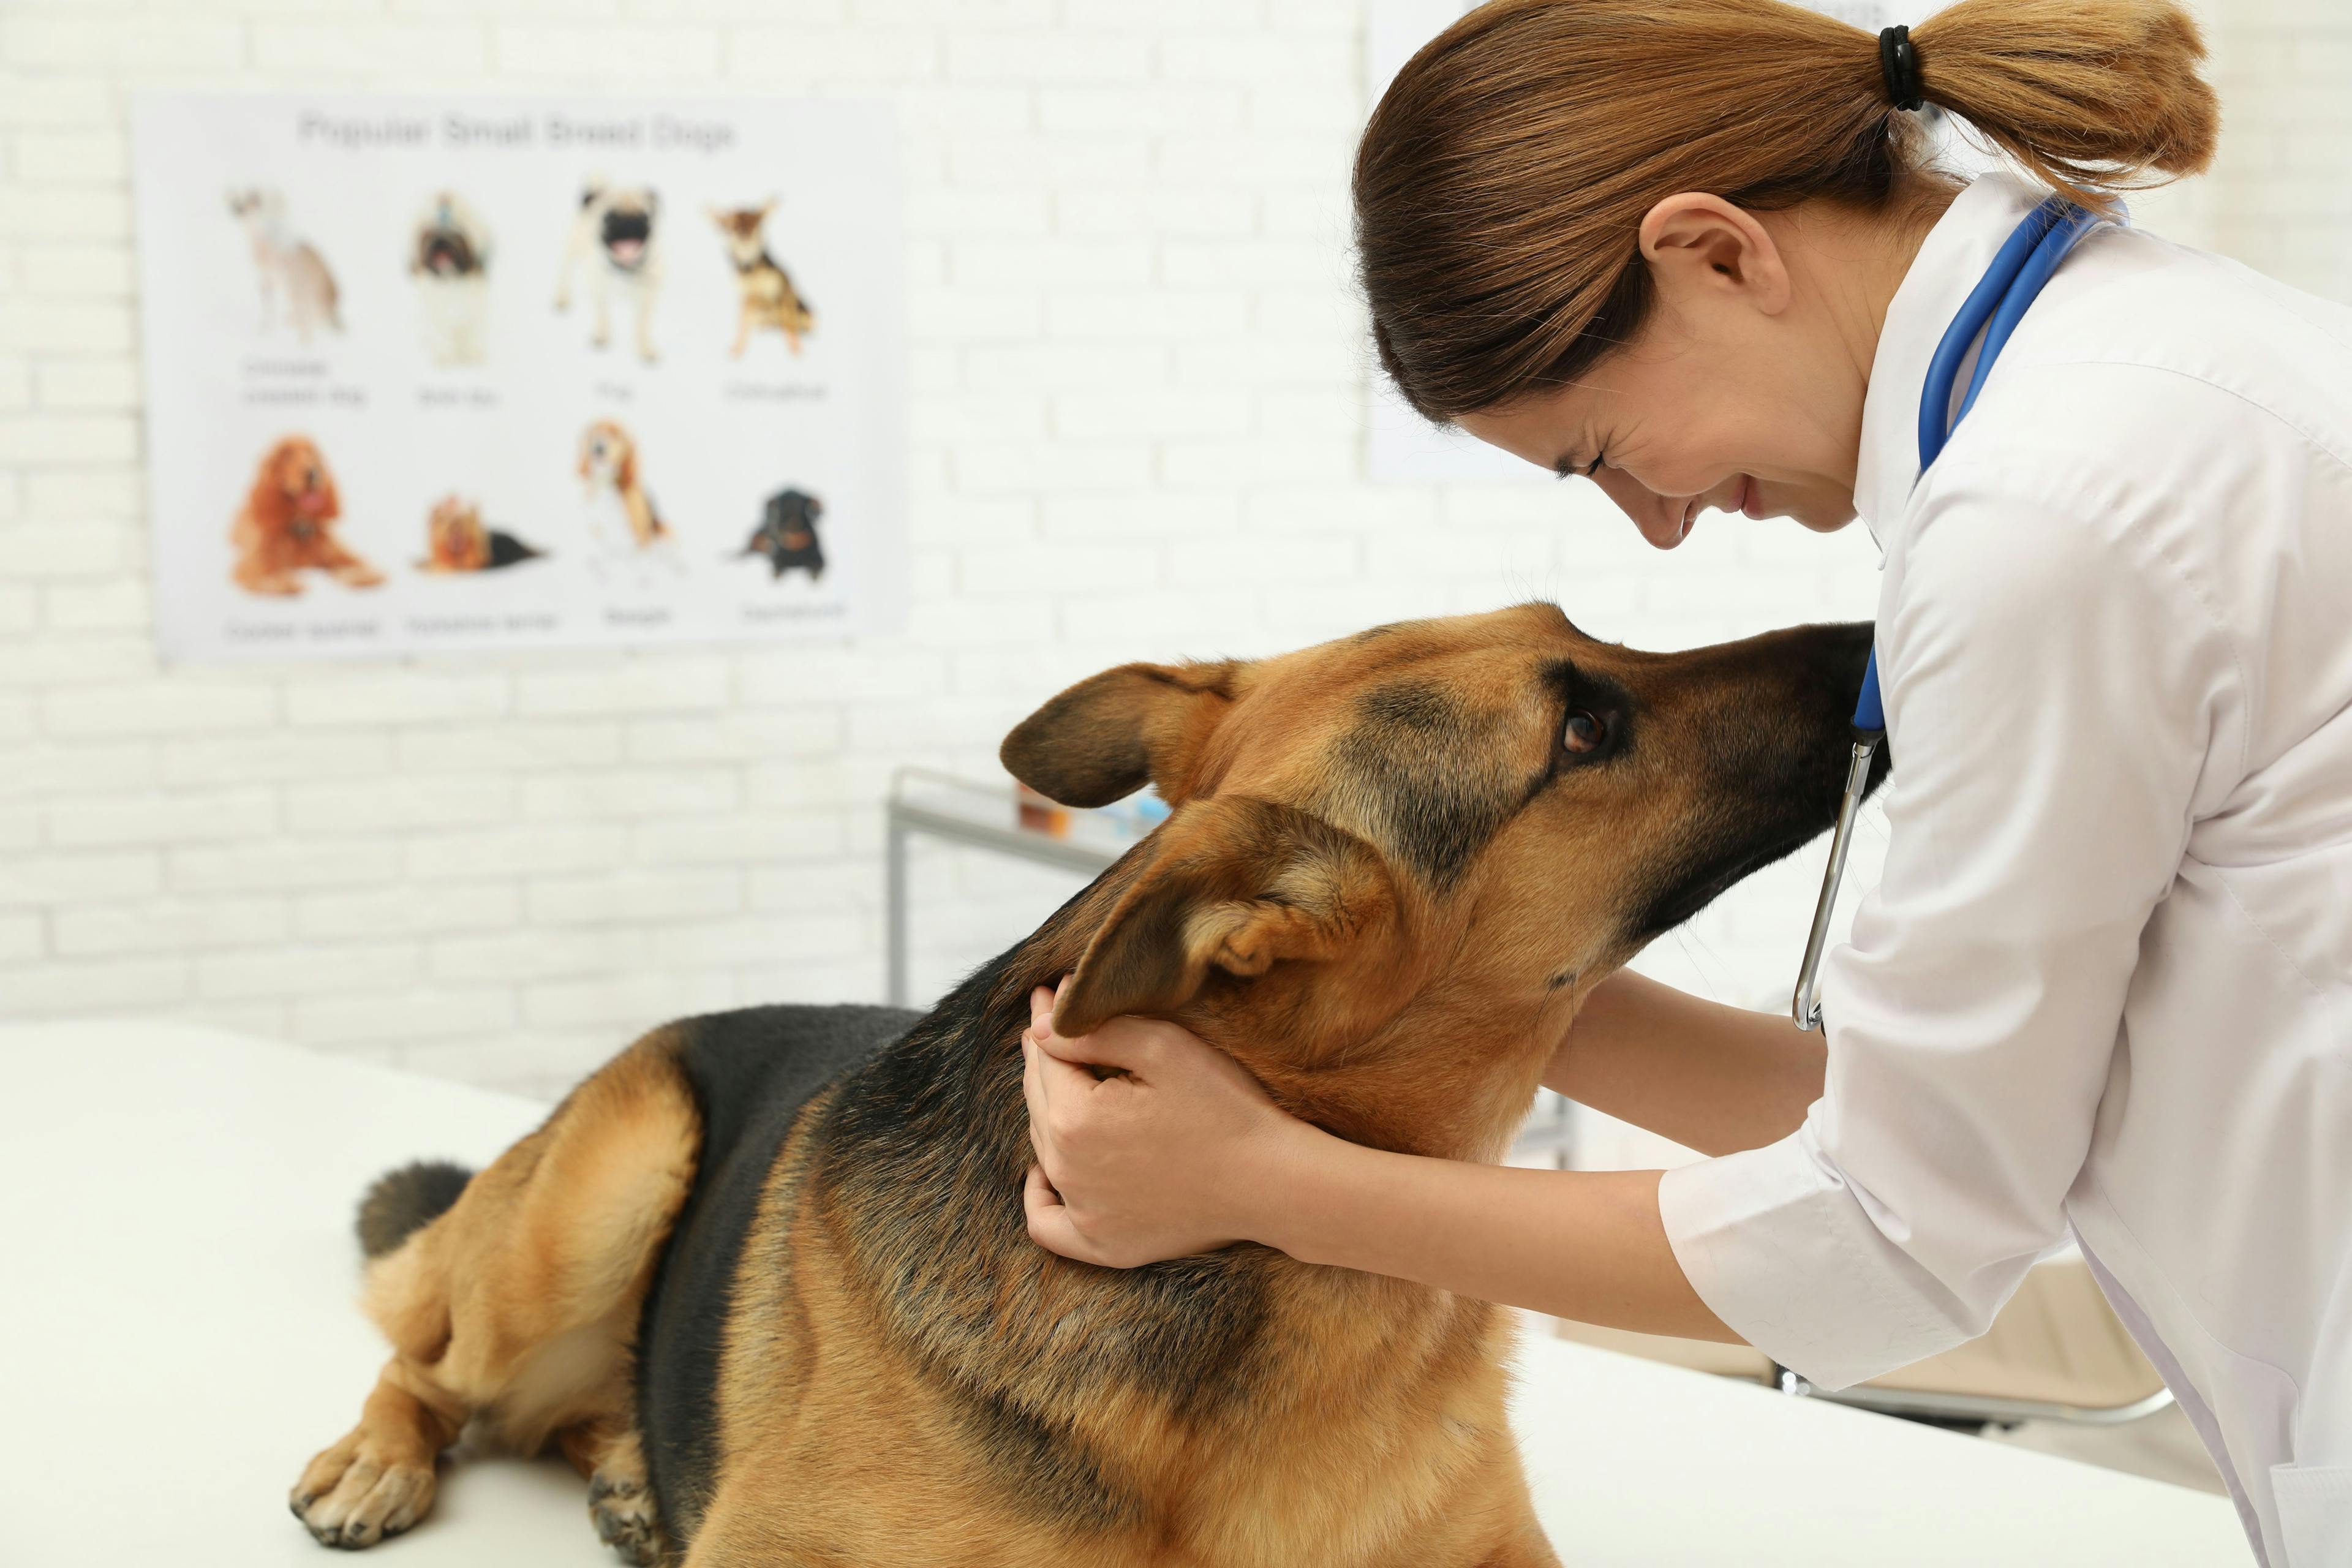 Breakthrough nonsurgical treatment for canine mast cell tumors is now on the market